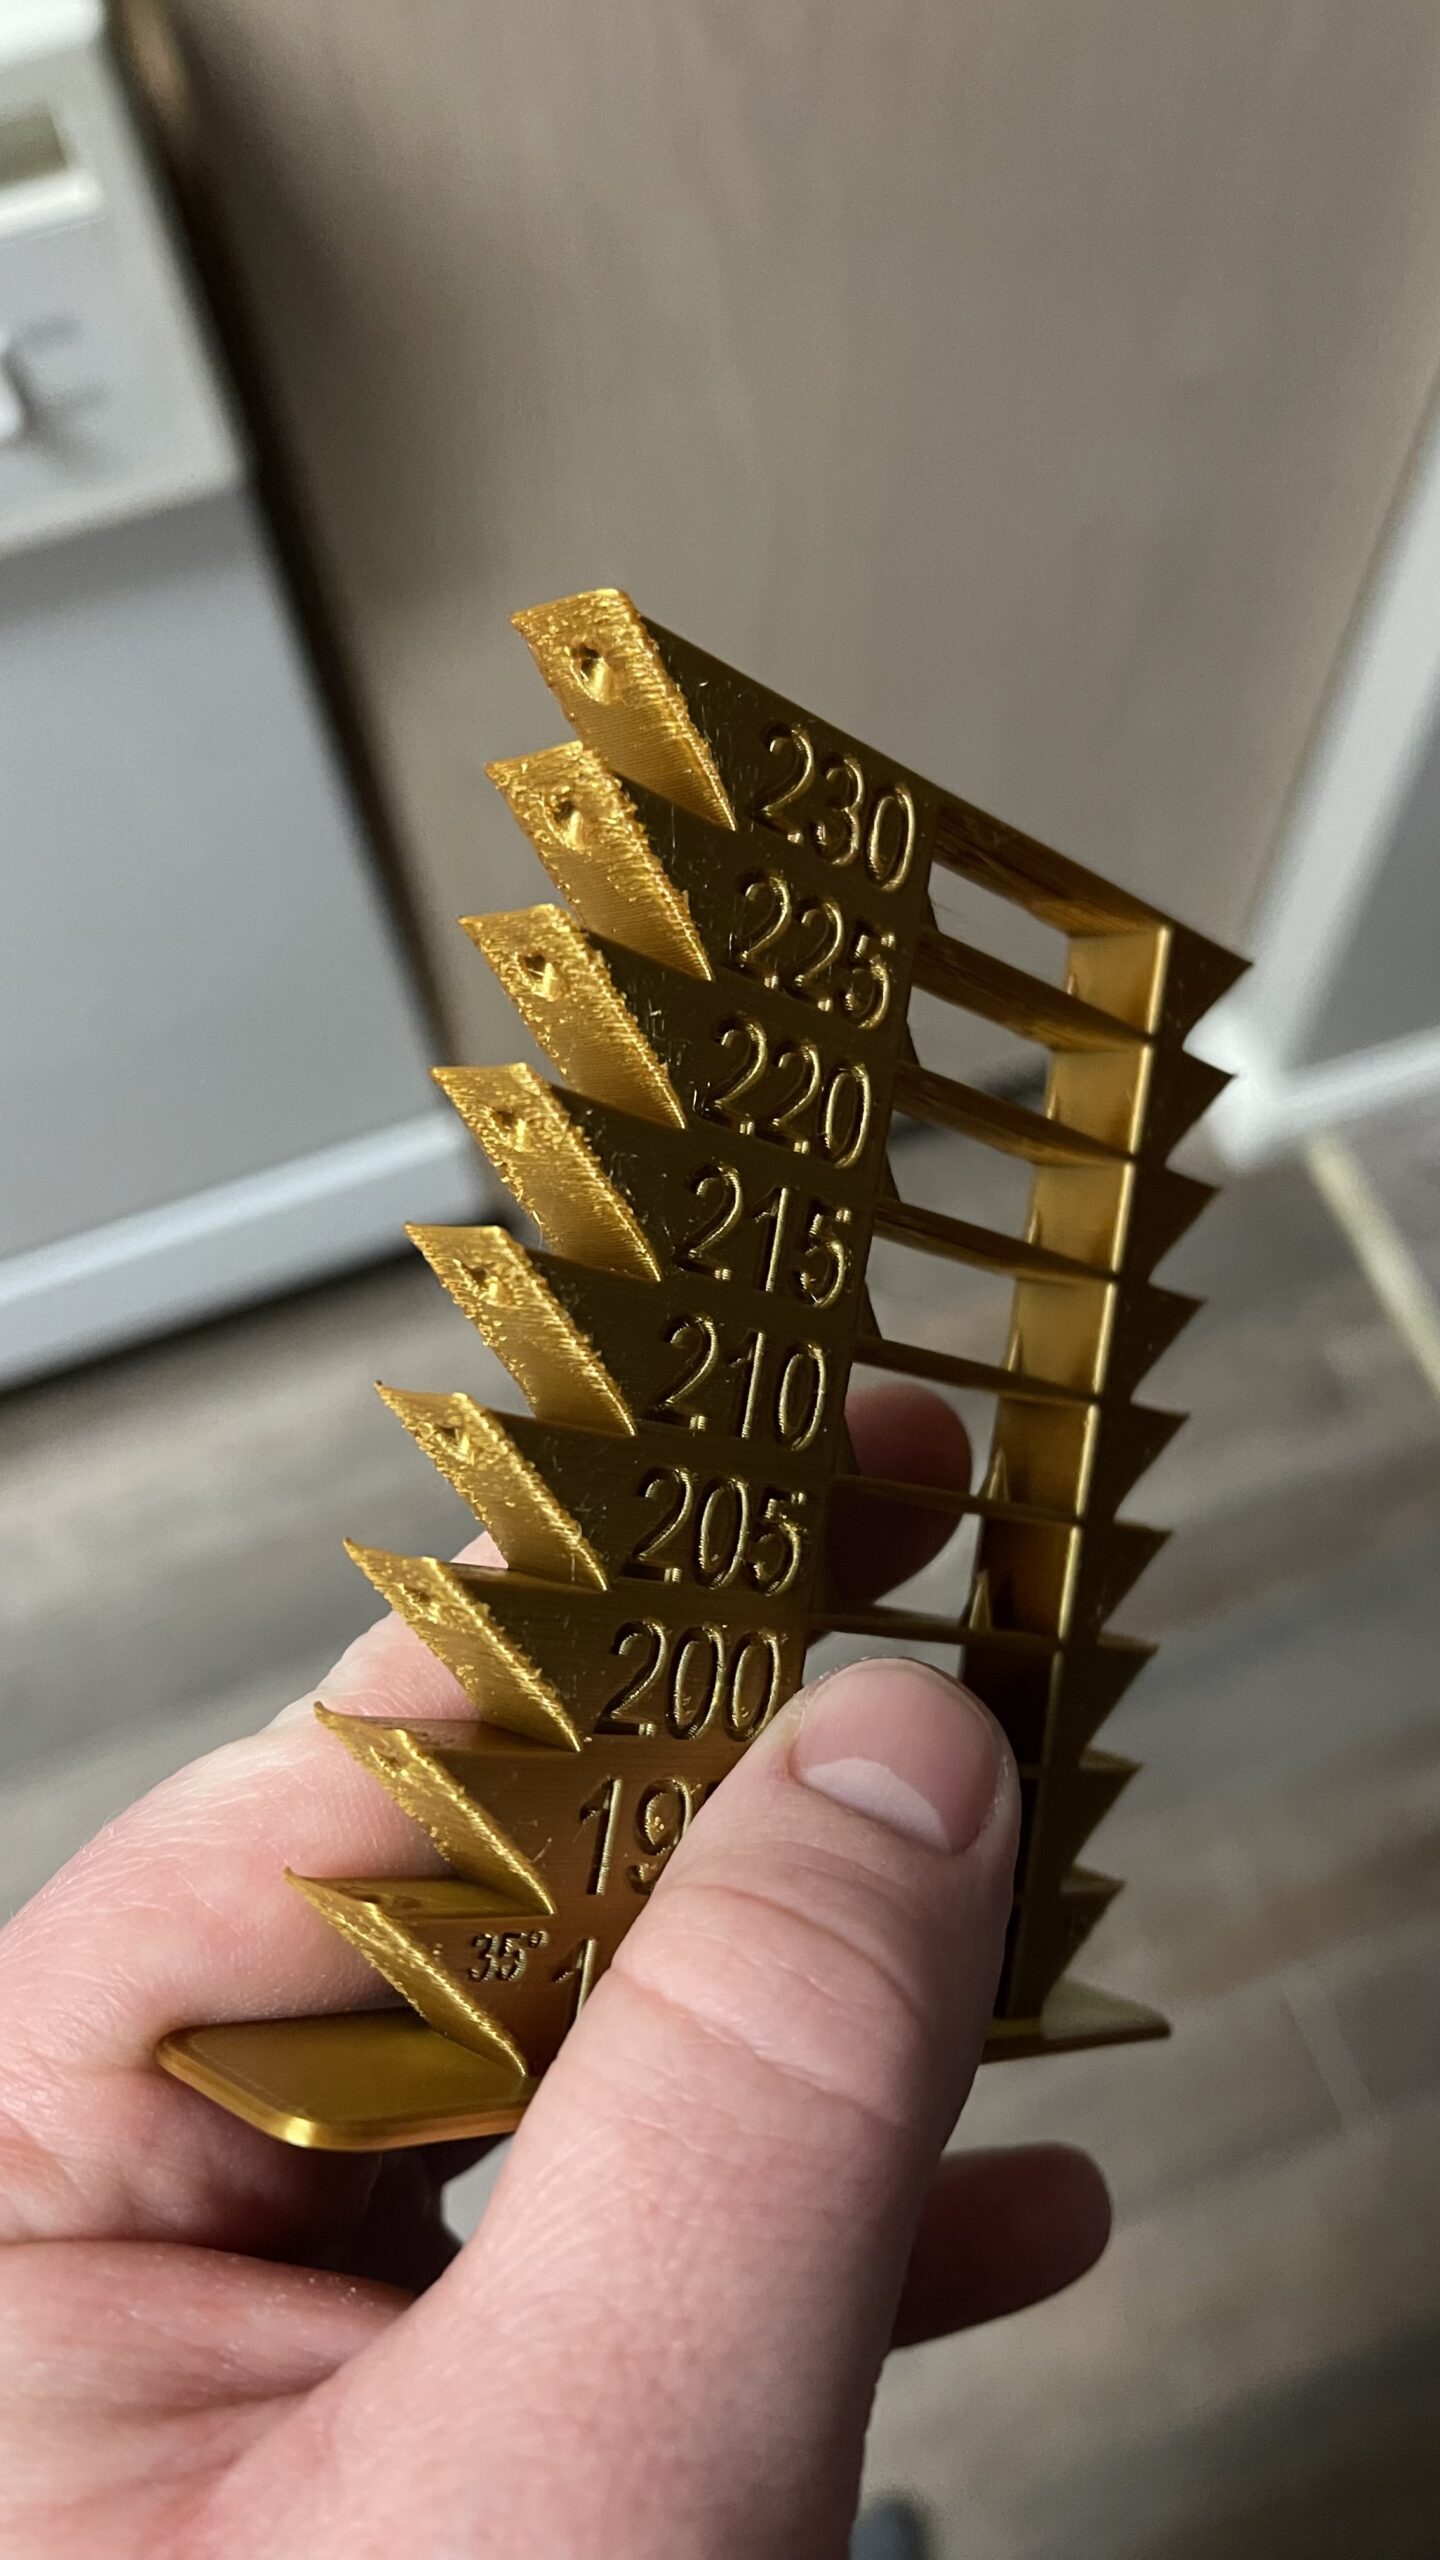 Do I have a problem with adhesion? I'm trying to print a Golden